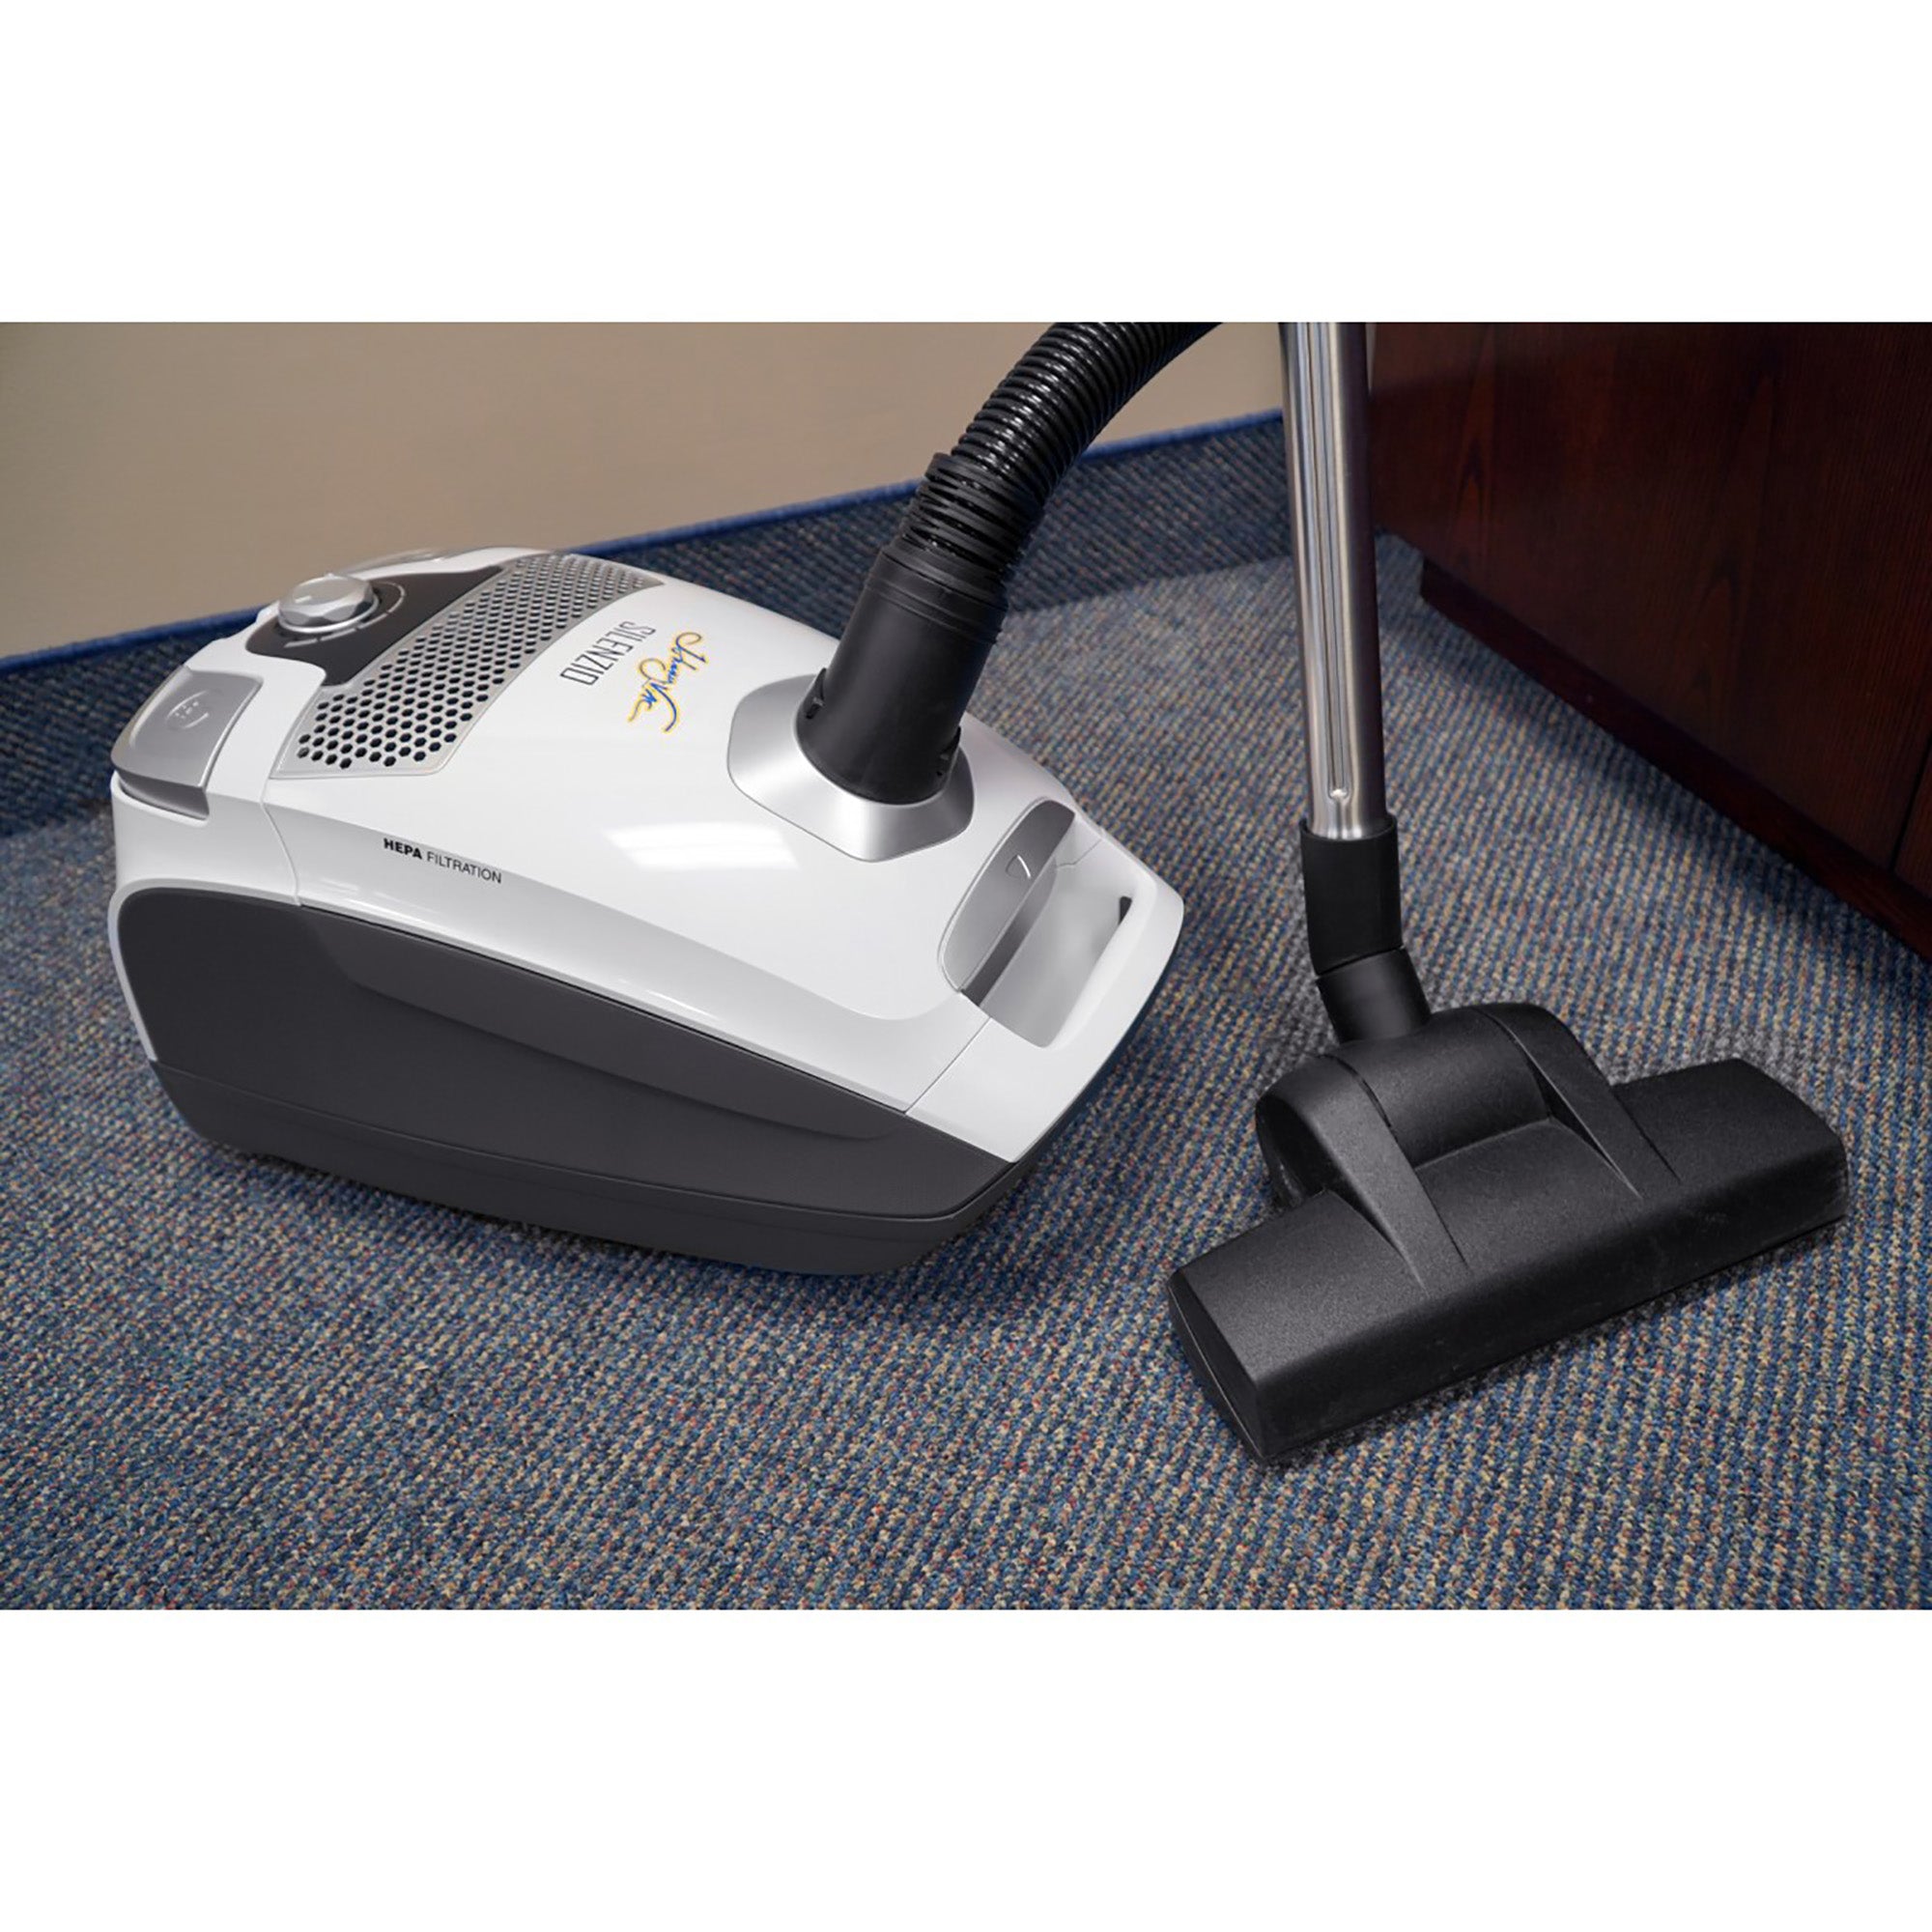 Johnny Vac Silenzio Canister Vacuum with HEPA Filtration and Variable Suction Control